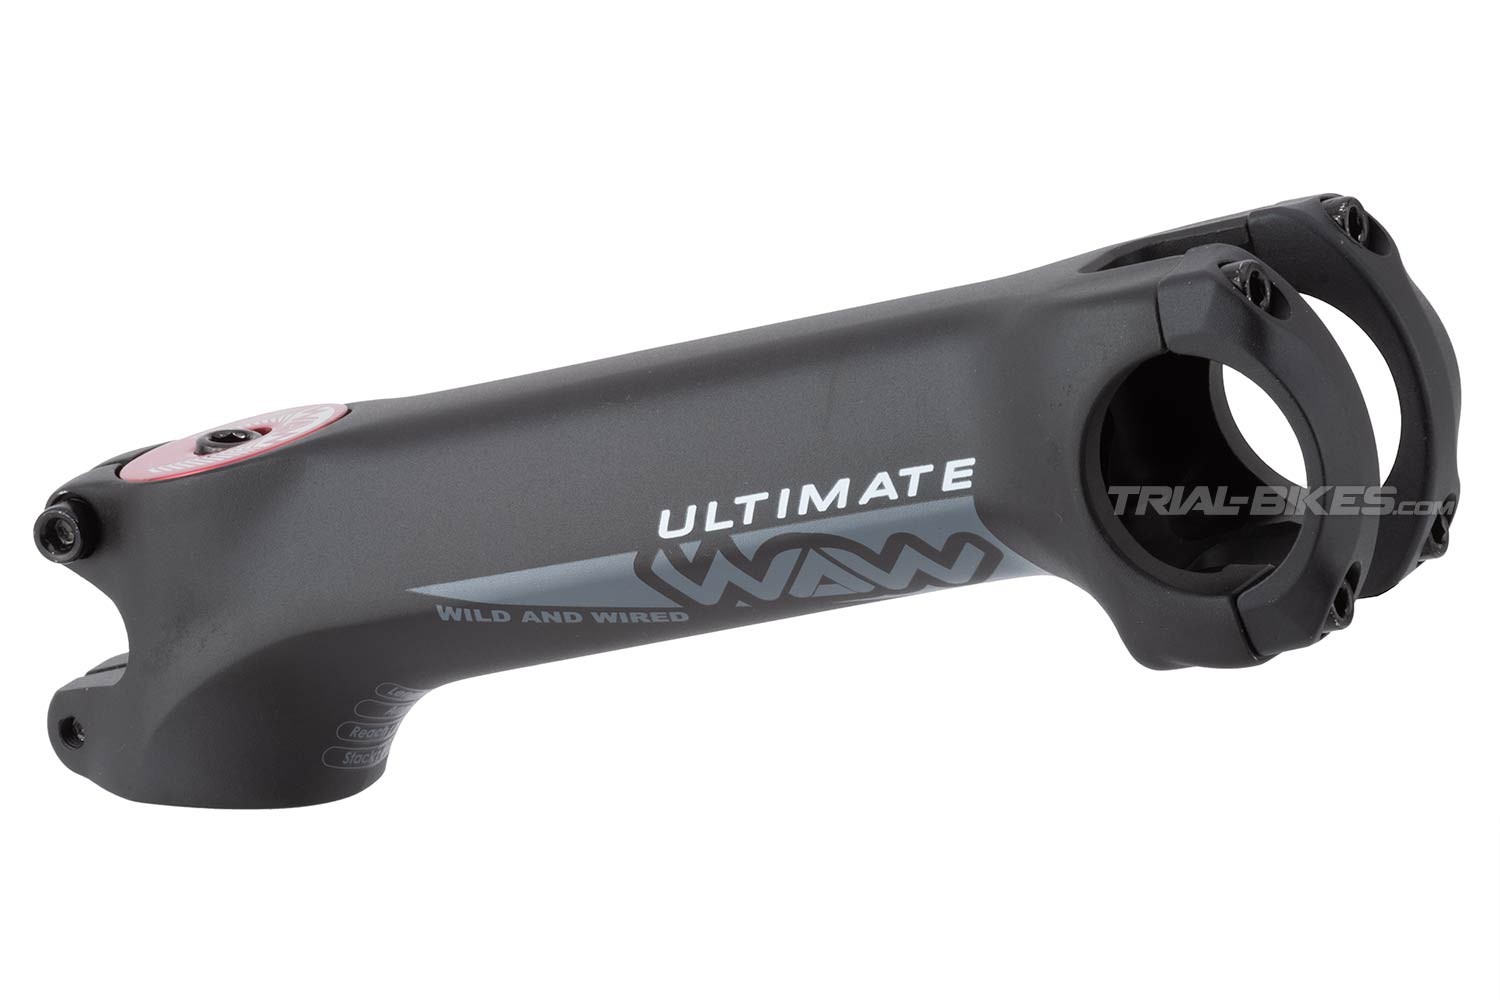 Crewkerz Waw Ultimate Stem (with CNC top cap) - TRIAL-BIKES